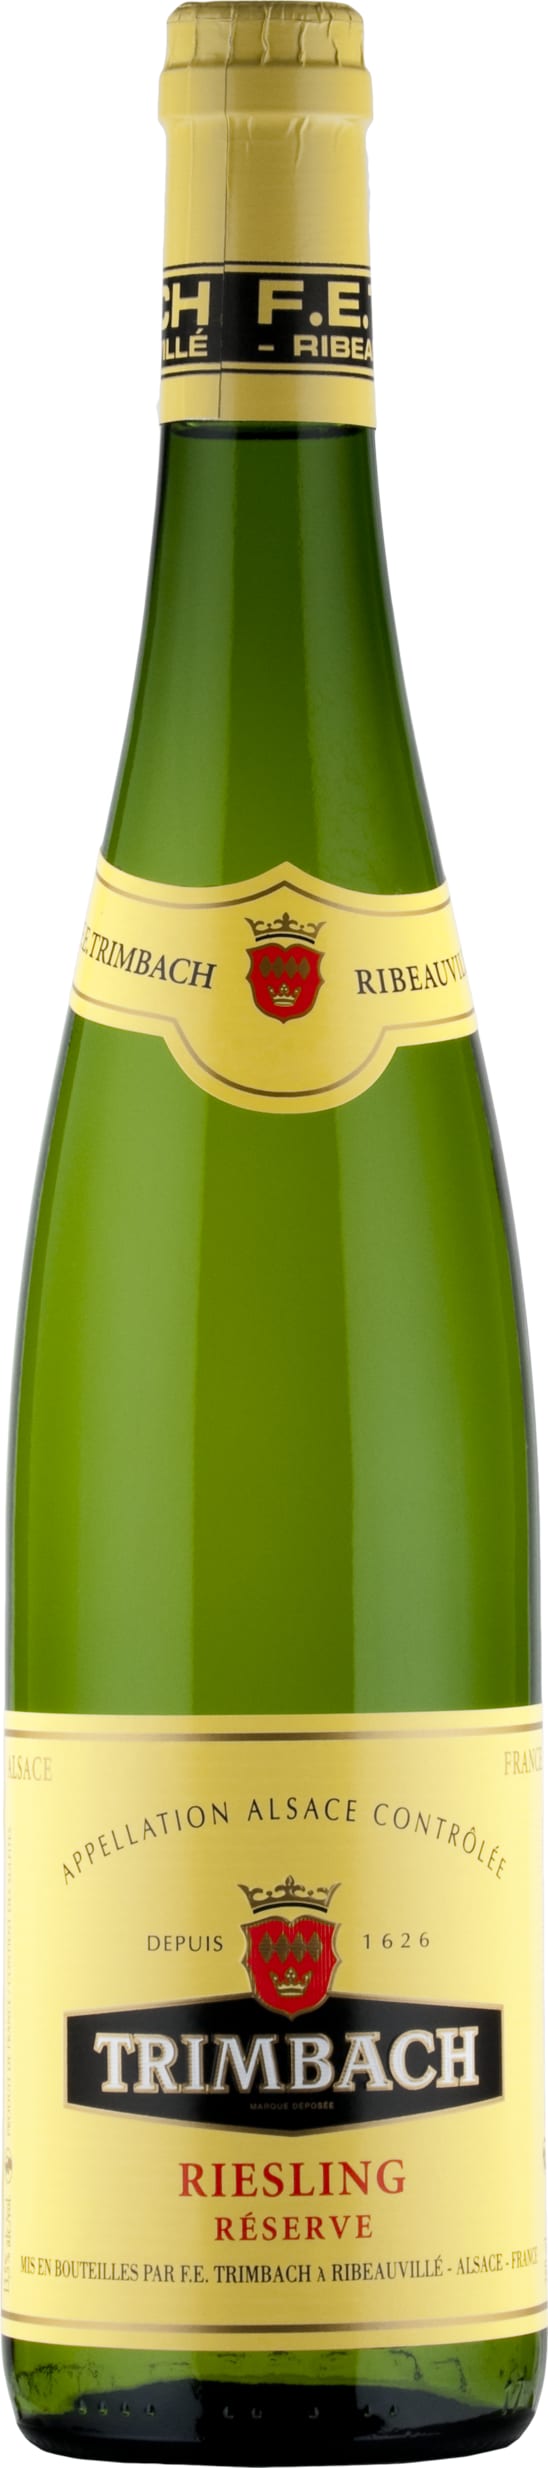 Trimbach Riesling Reserve 2022 75cl - Buy Trimbach Wines from GREAT WINES DIRECT wine shop